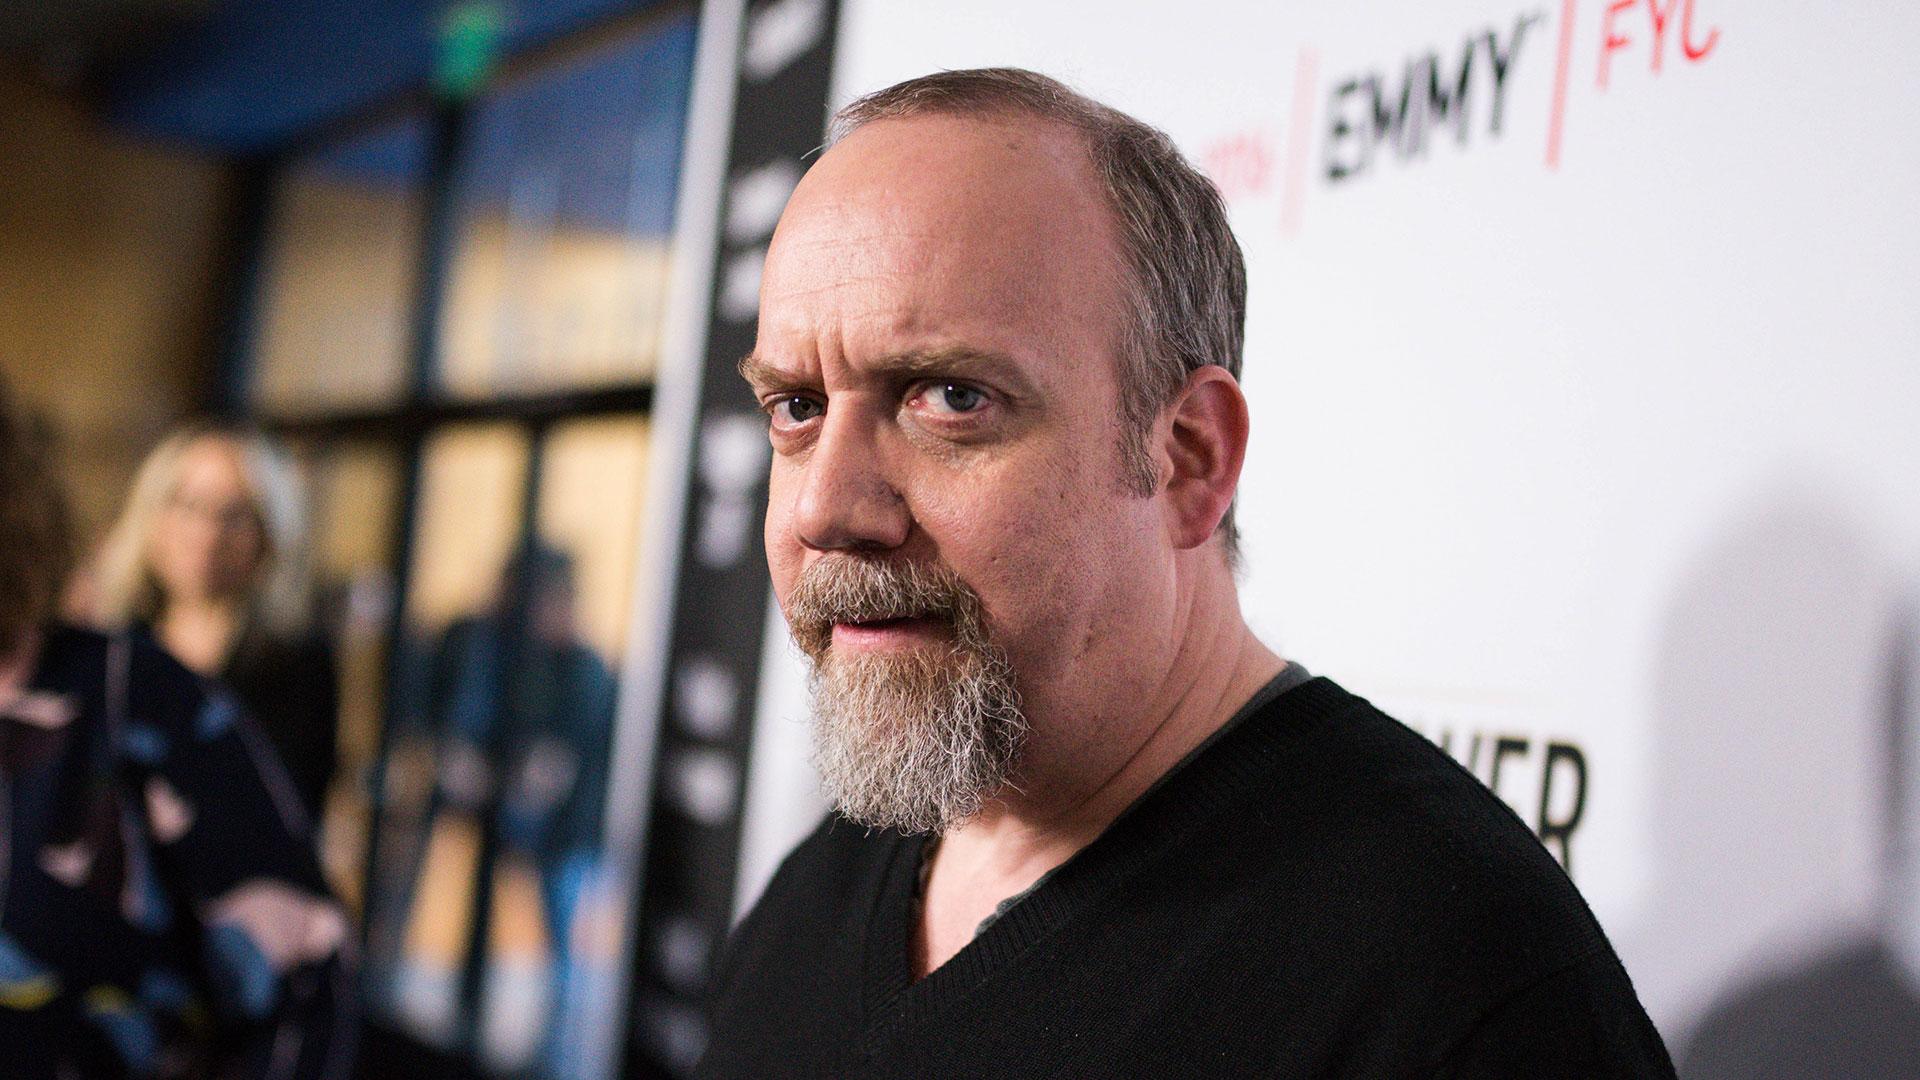 Paul Giamatti Acting is harder than I thought it would be